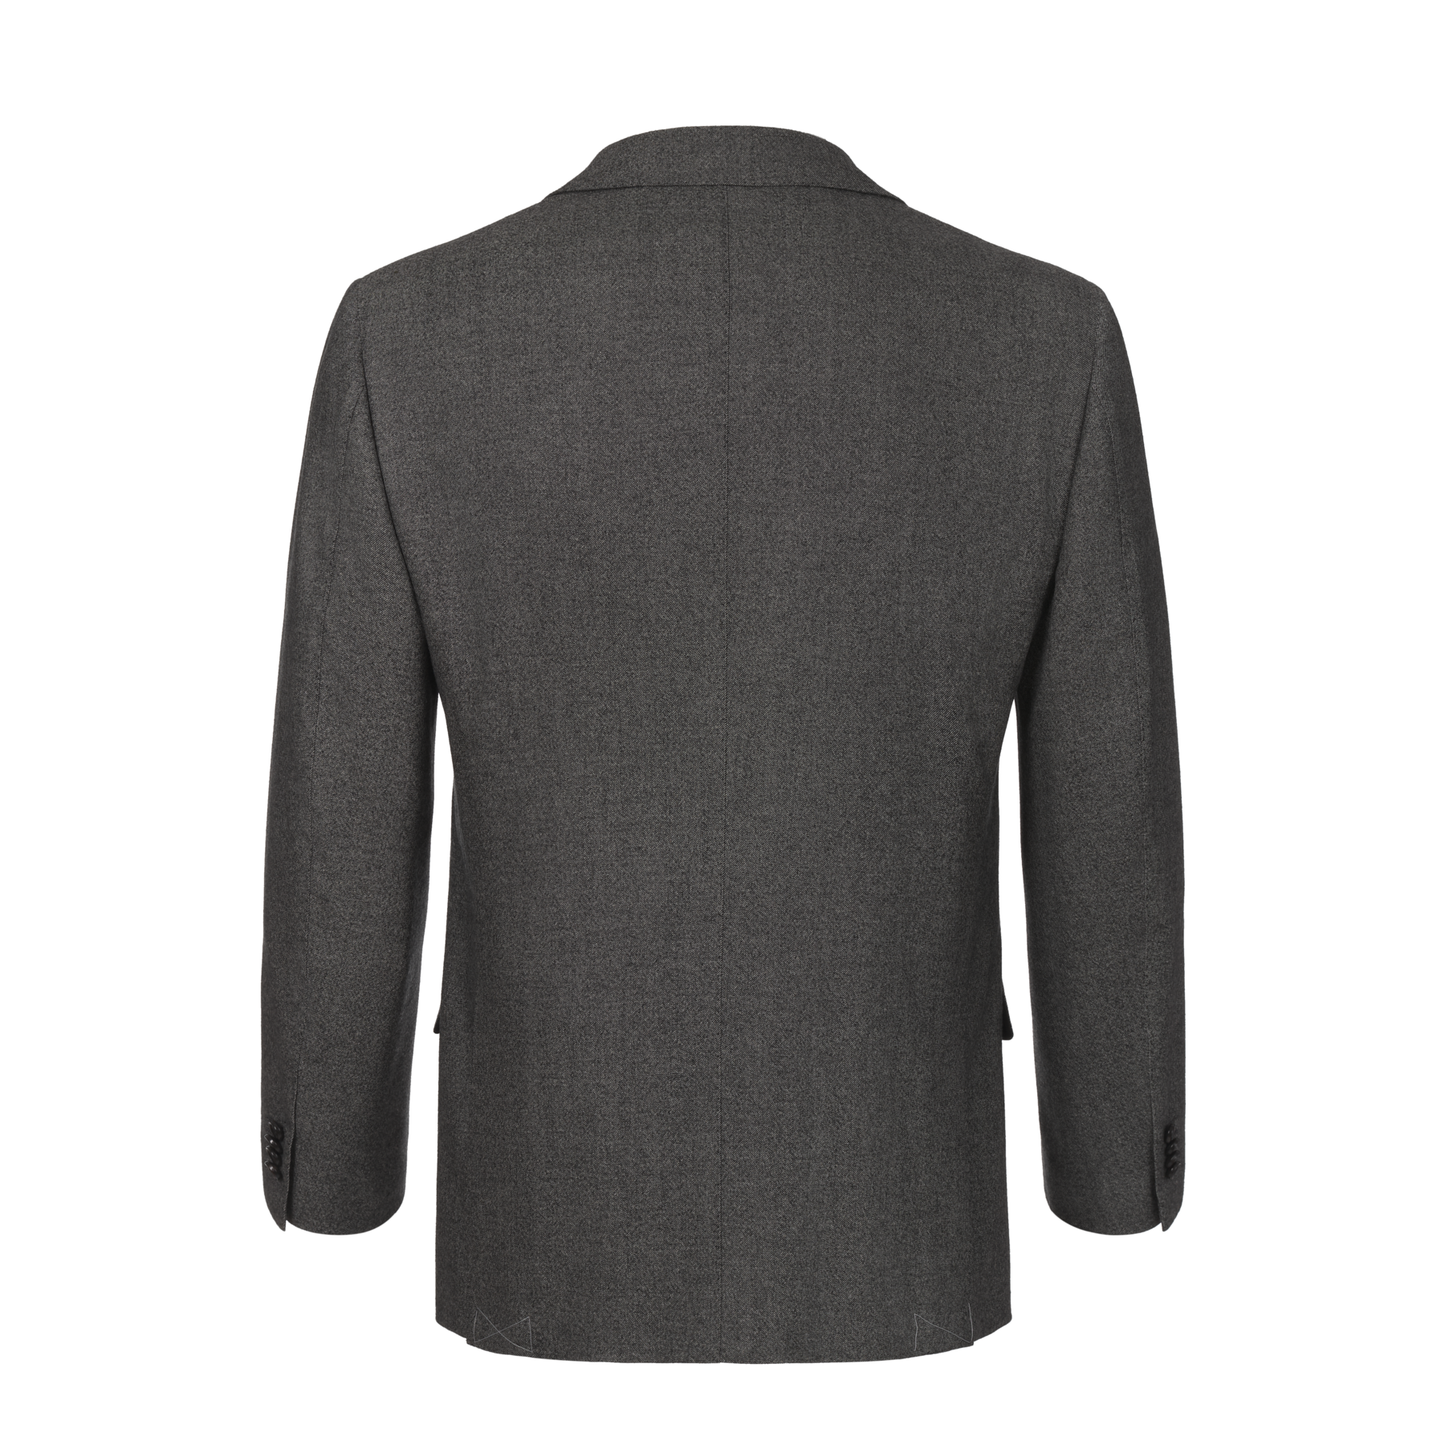 Cesare Attolini Single-Breasted Wool Suit in Grey - SARTALE